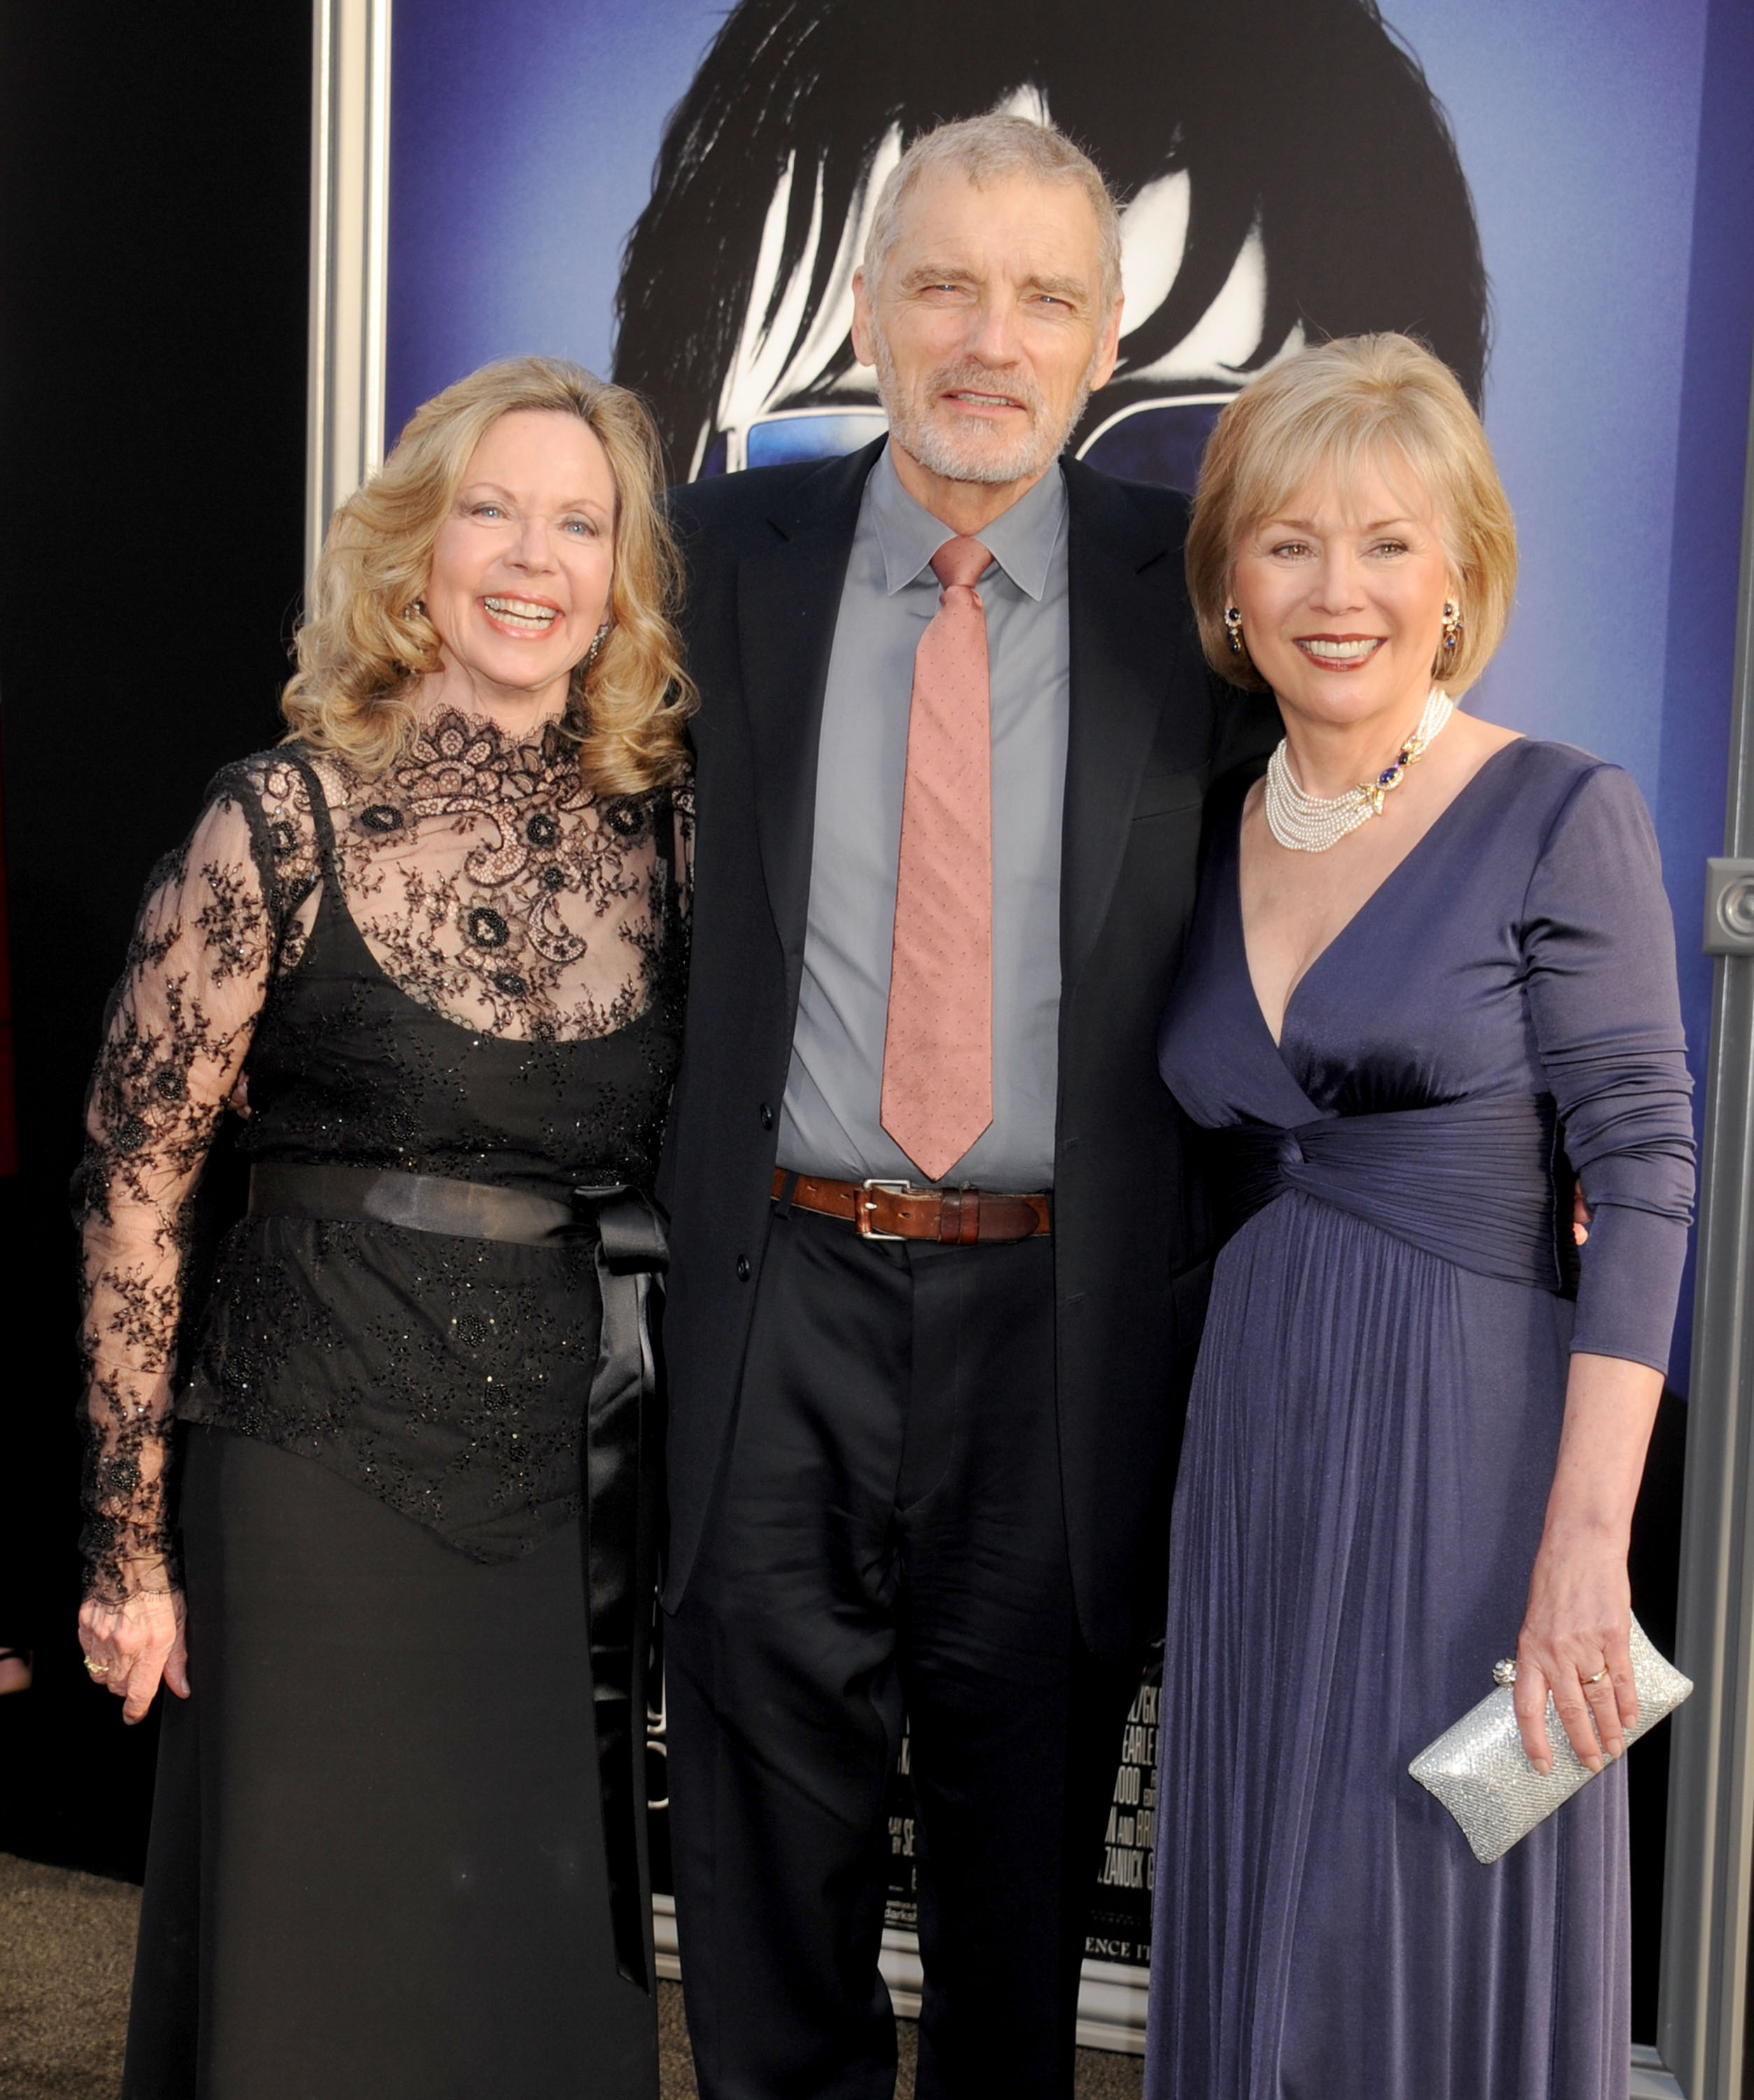 Lara Parker, David Selby, and Kathryn Leigh Scott in Hollywood, California on May 7, 2012 | Source: Getty Images